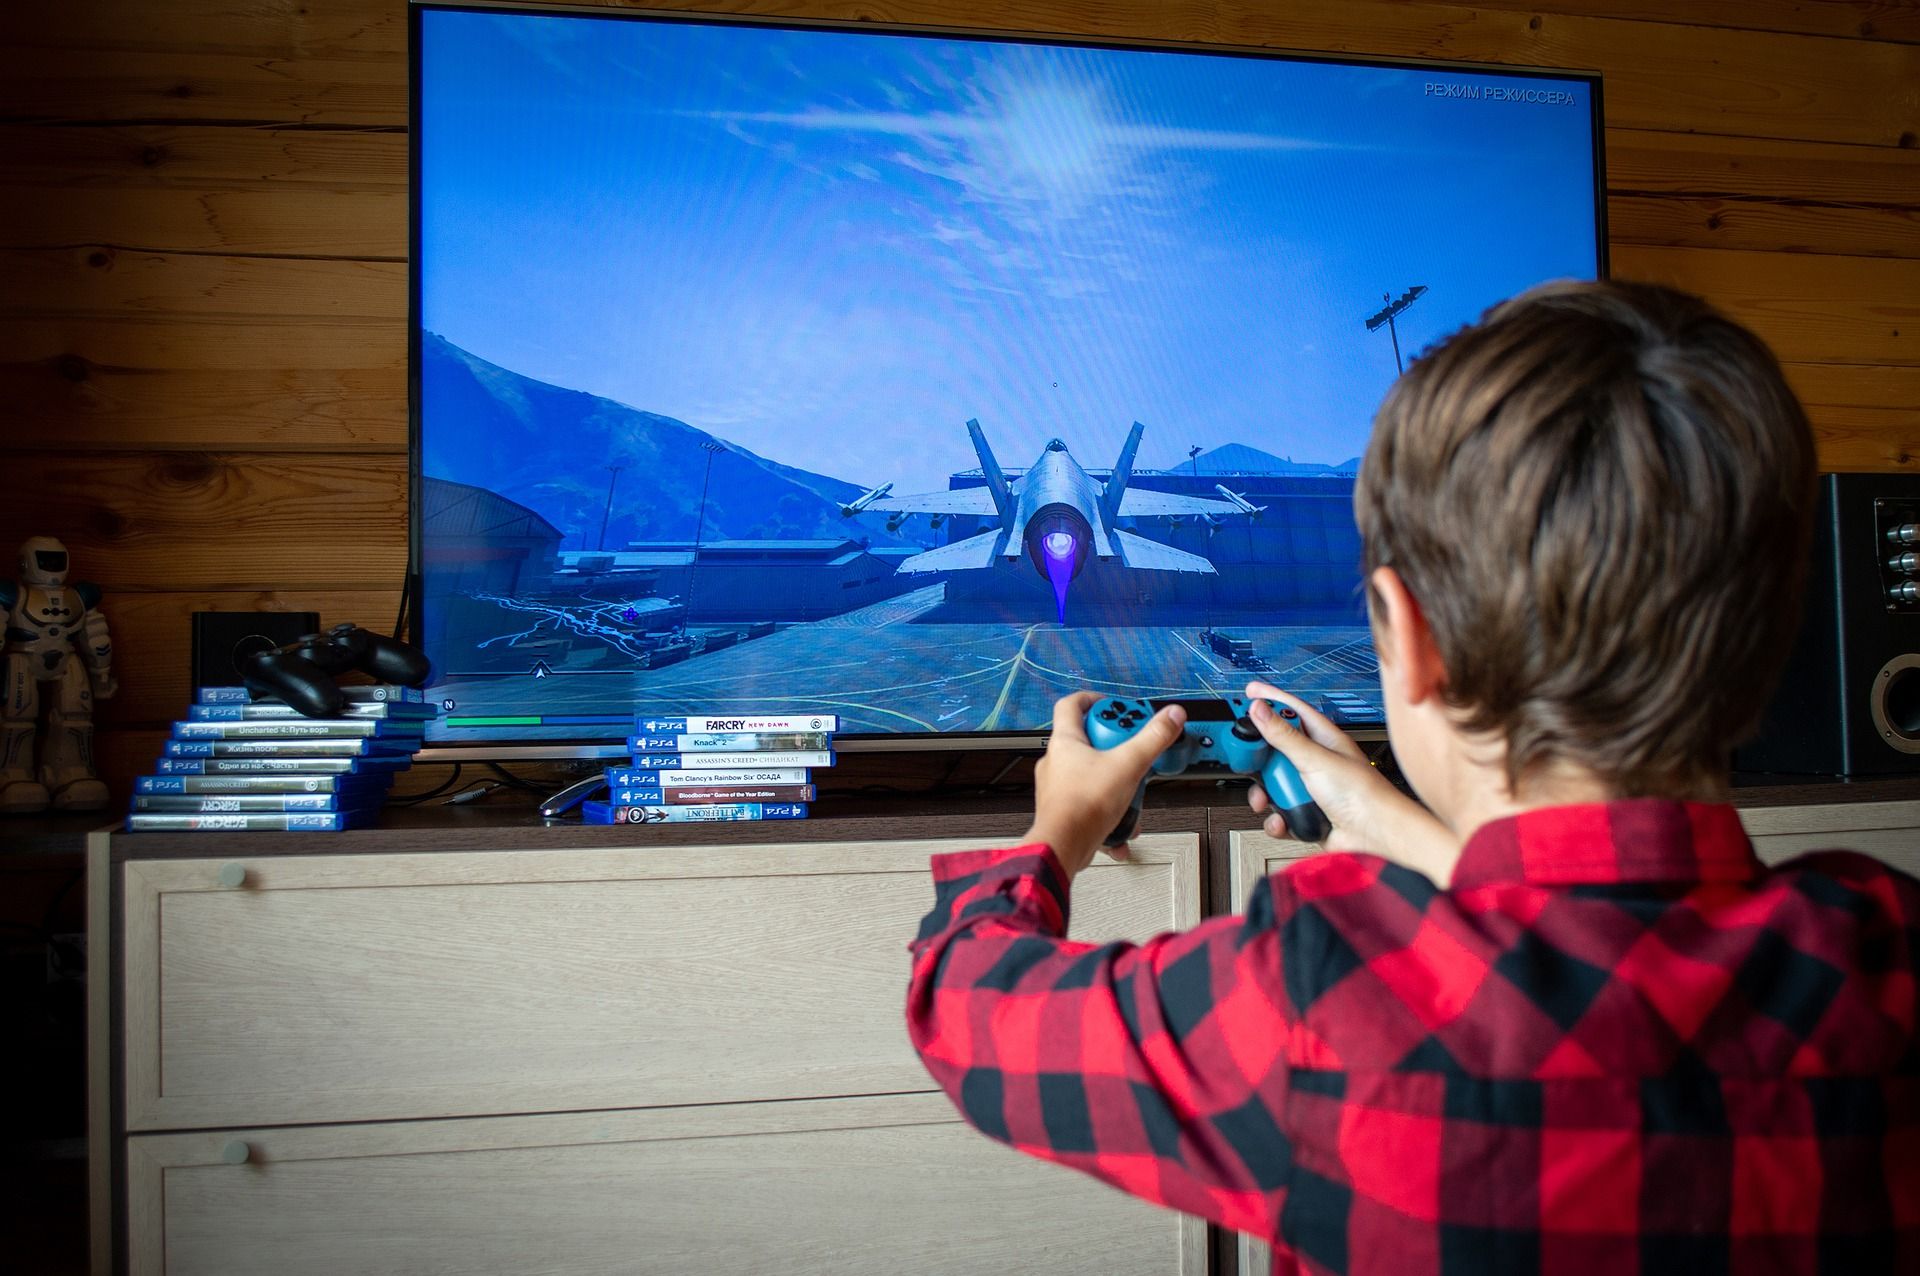 boy playing videogames on playstation 4 with ps4 game cases in background